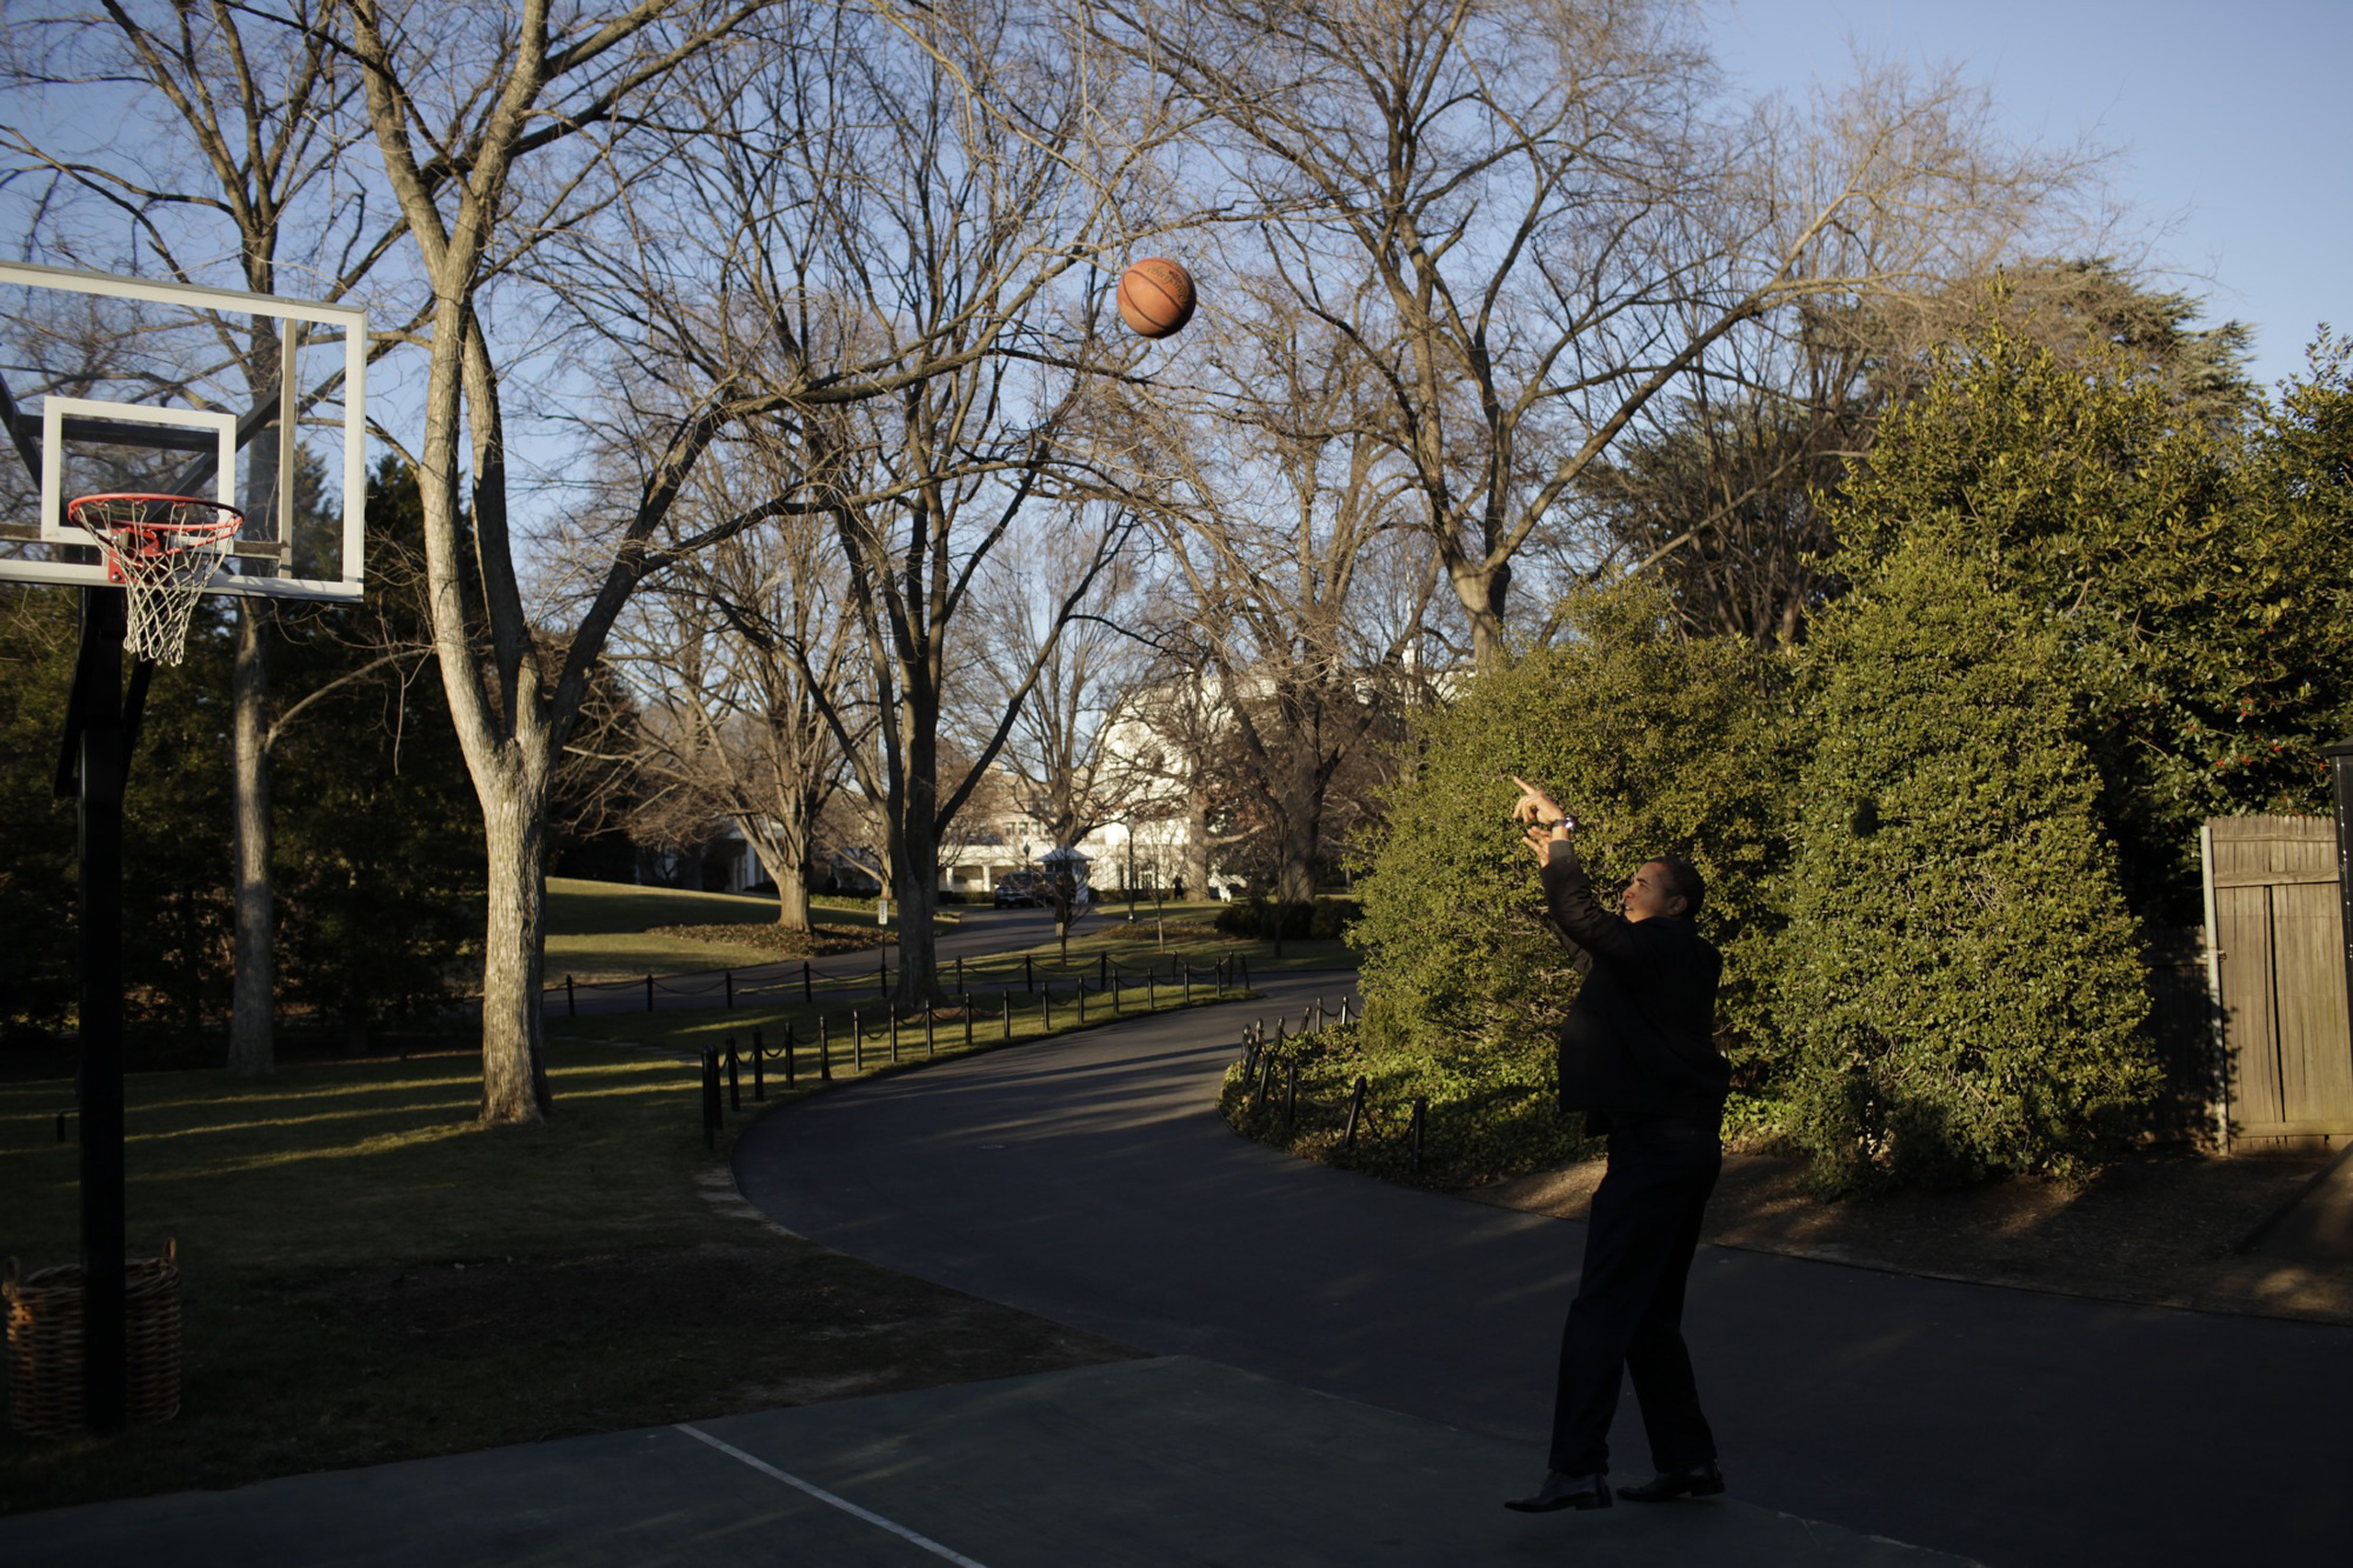 President Barack Obama shoots a basketball during a historical tour of the White House on Jan 24, 2009.